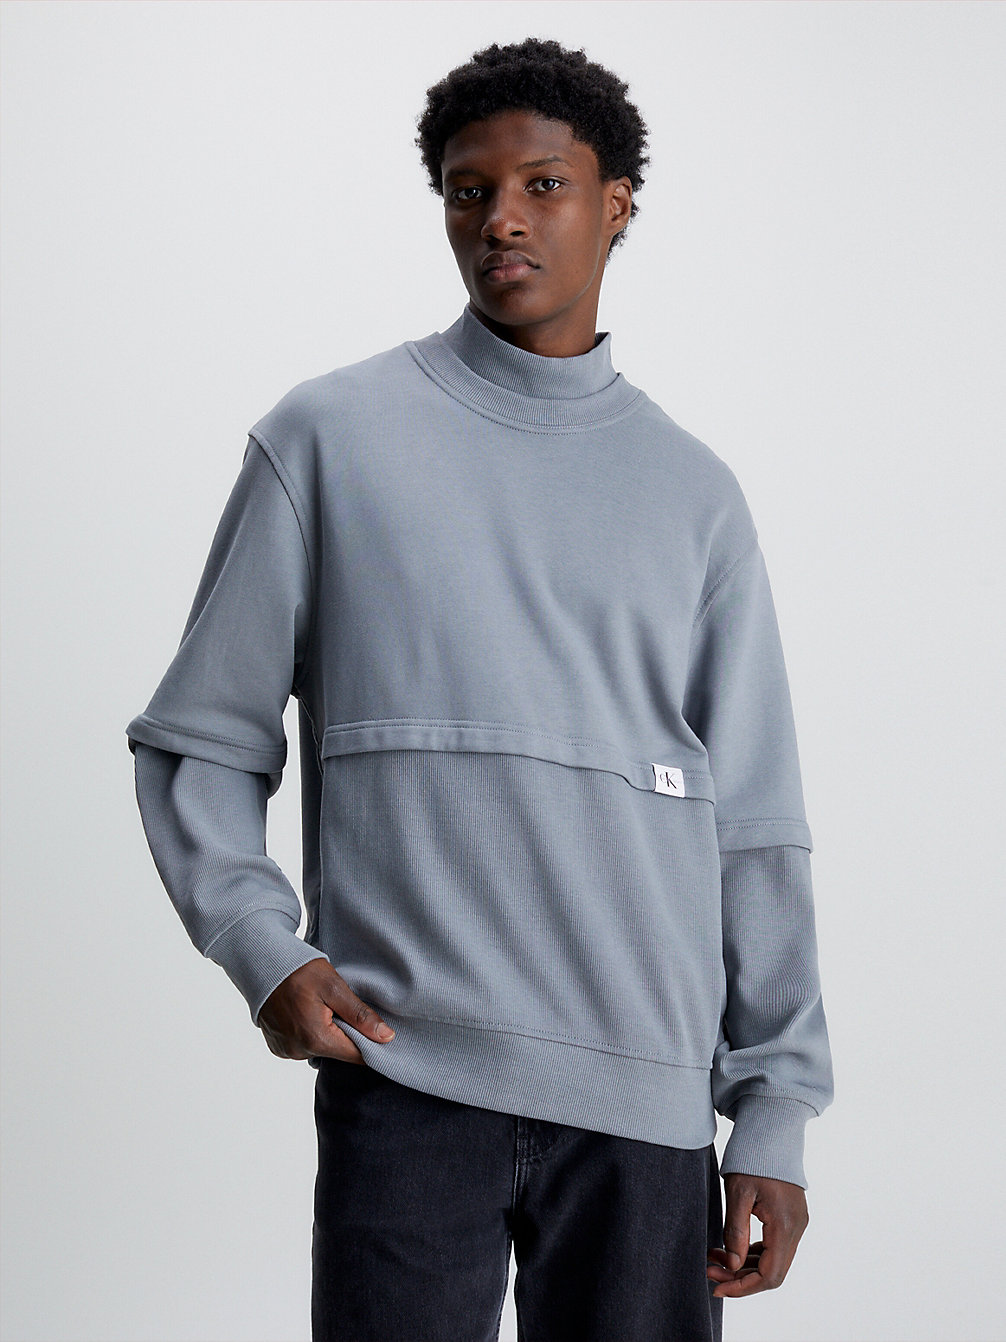 OVERCAST GREY Relaxed Material Mix Sweatshirt undefined men Calvin Klein